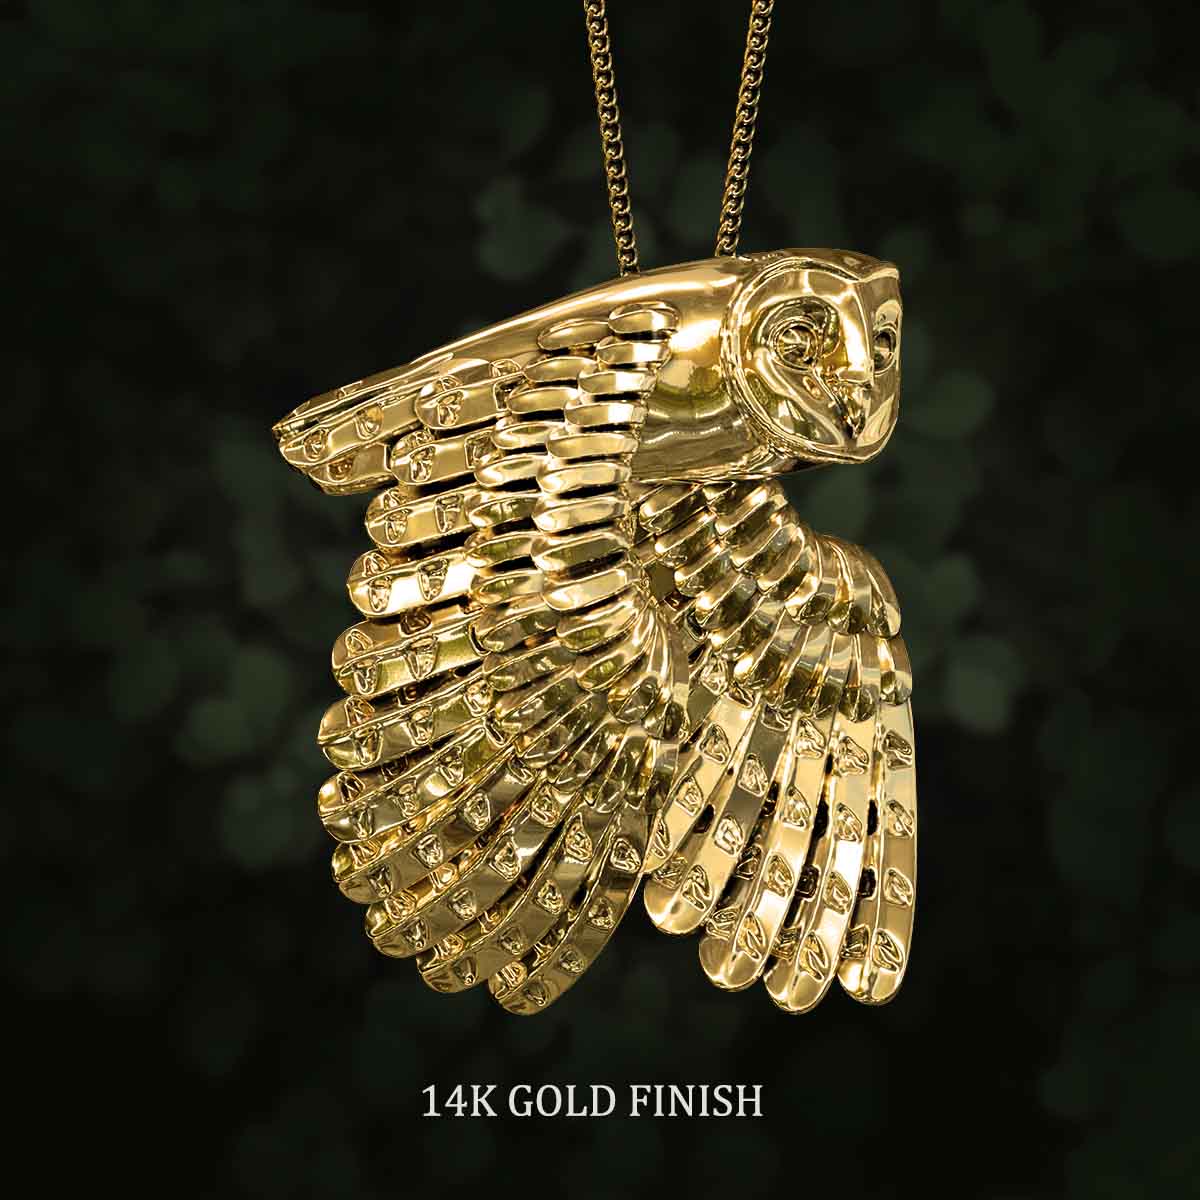 14k-Gold-Finish-Flying-Barn-Owl-Pendant-Jewelry-For-Necklace